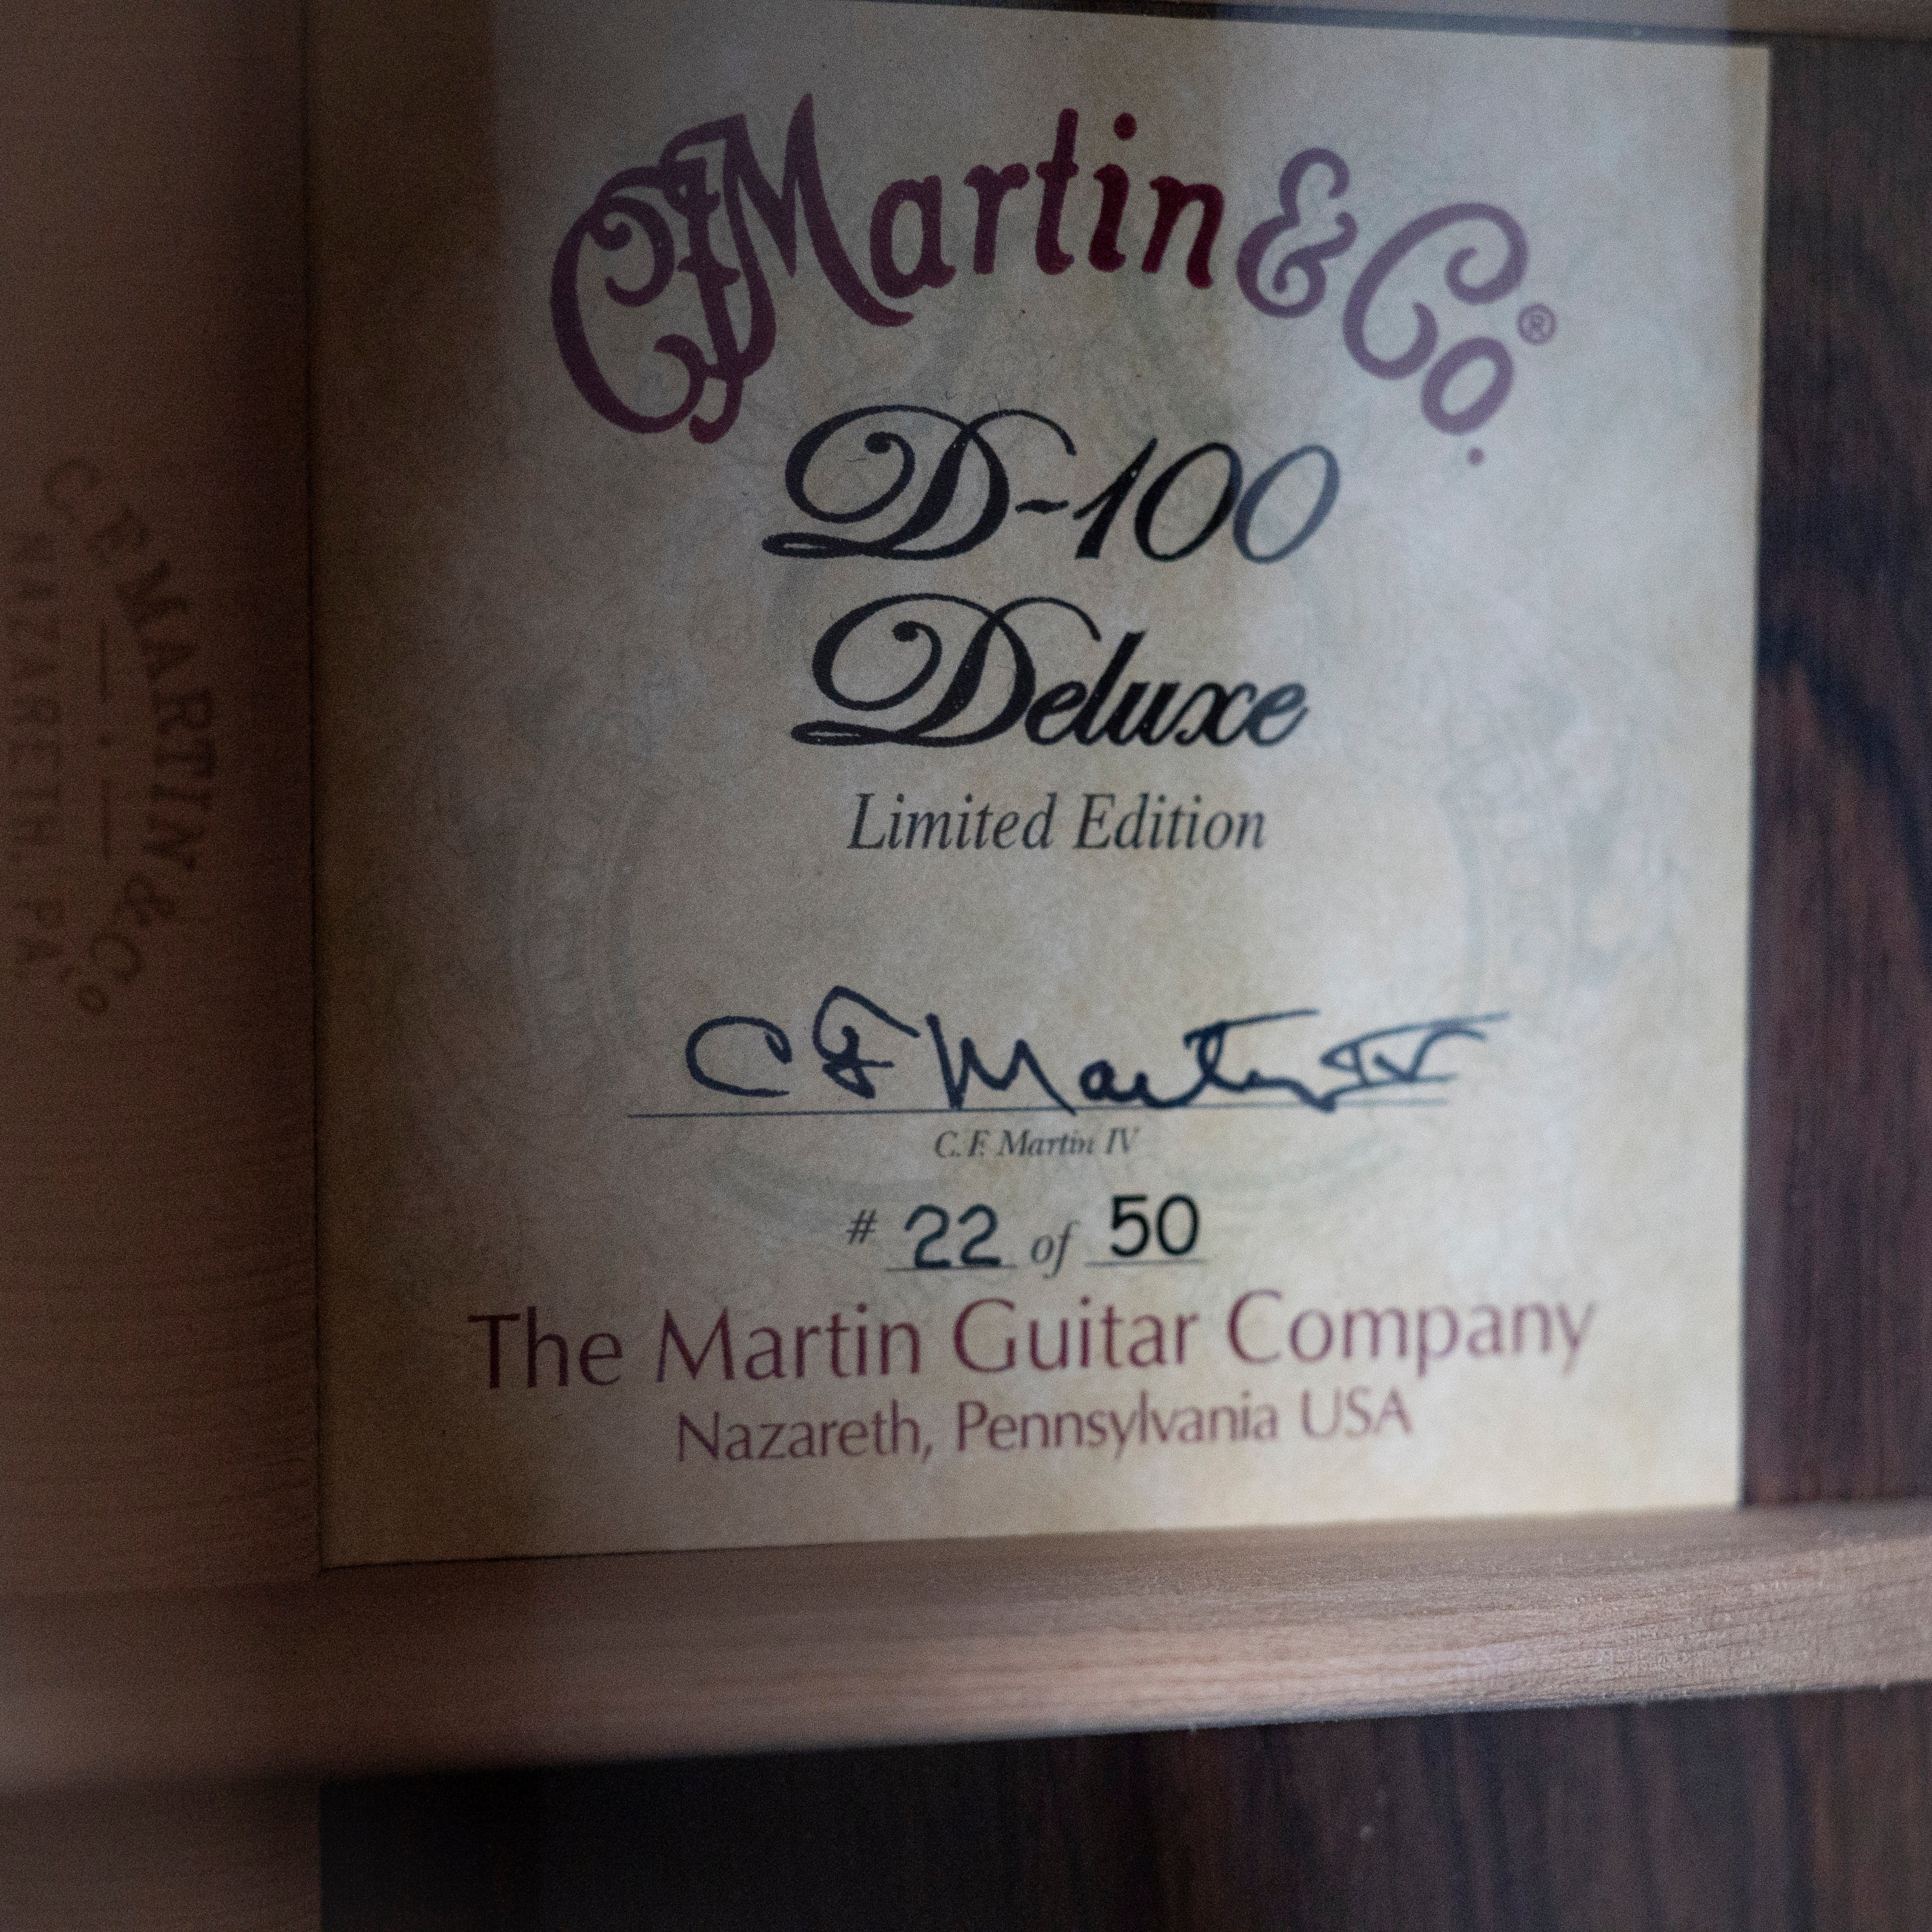 Martin 2004 D-100 Deluxe #22 of 50